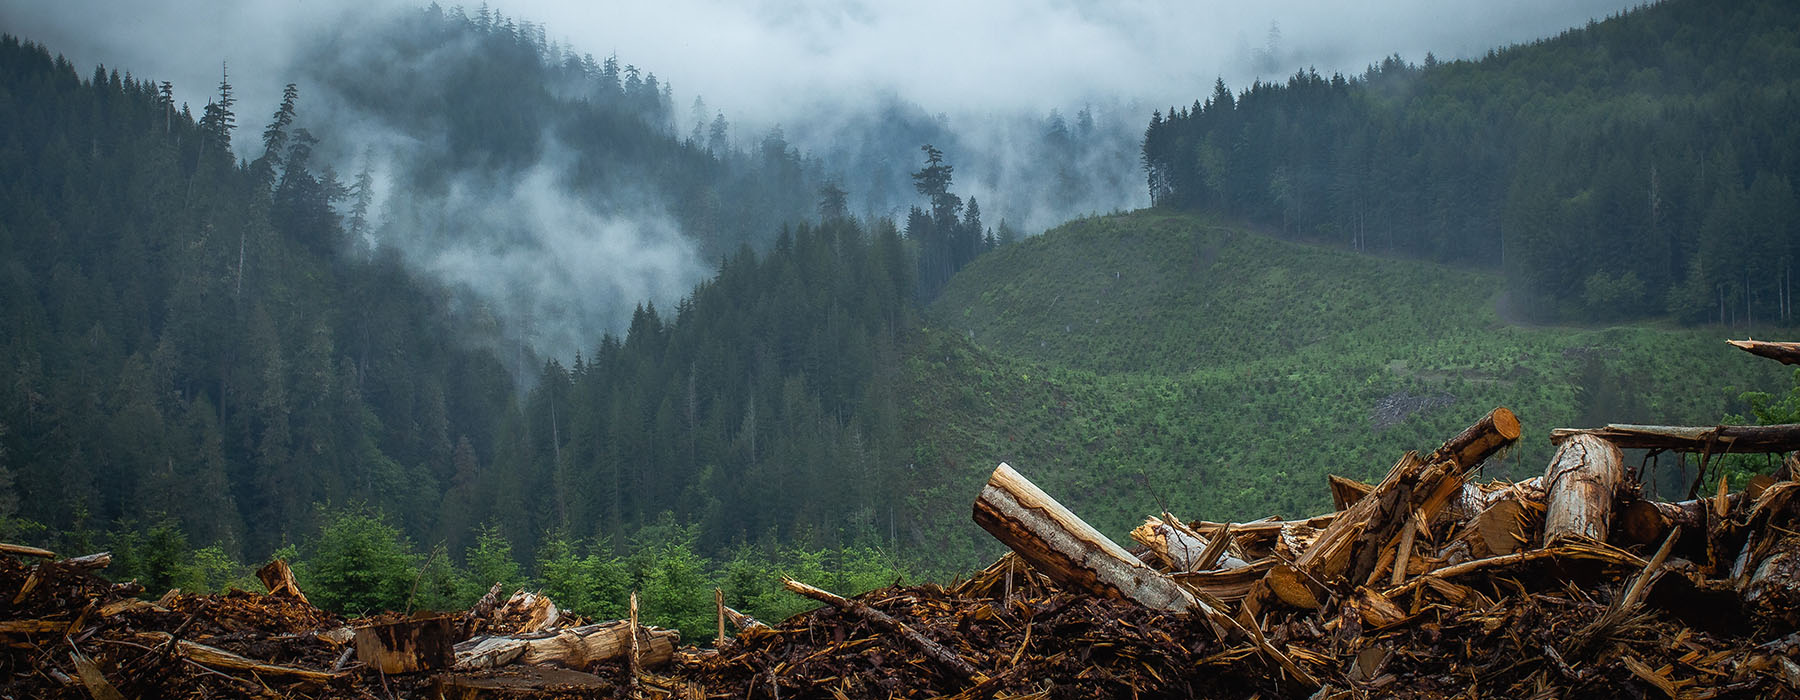 View of a pine forest shrouded in cloud. In the foreground of the photo is the remains of cut down trees, a mess of logs and debris